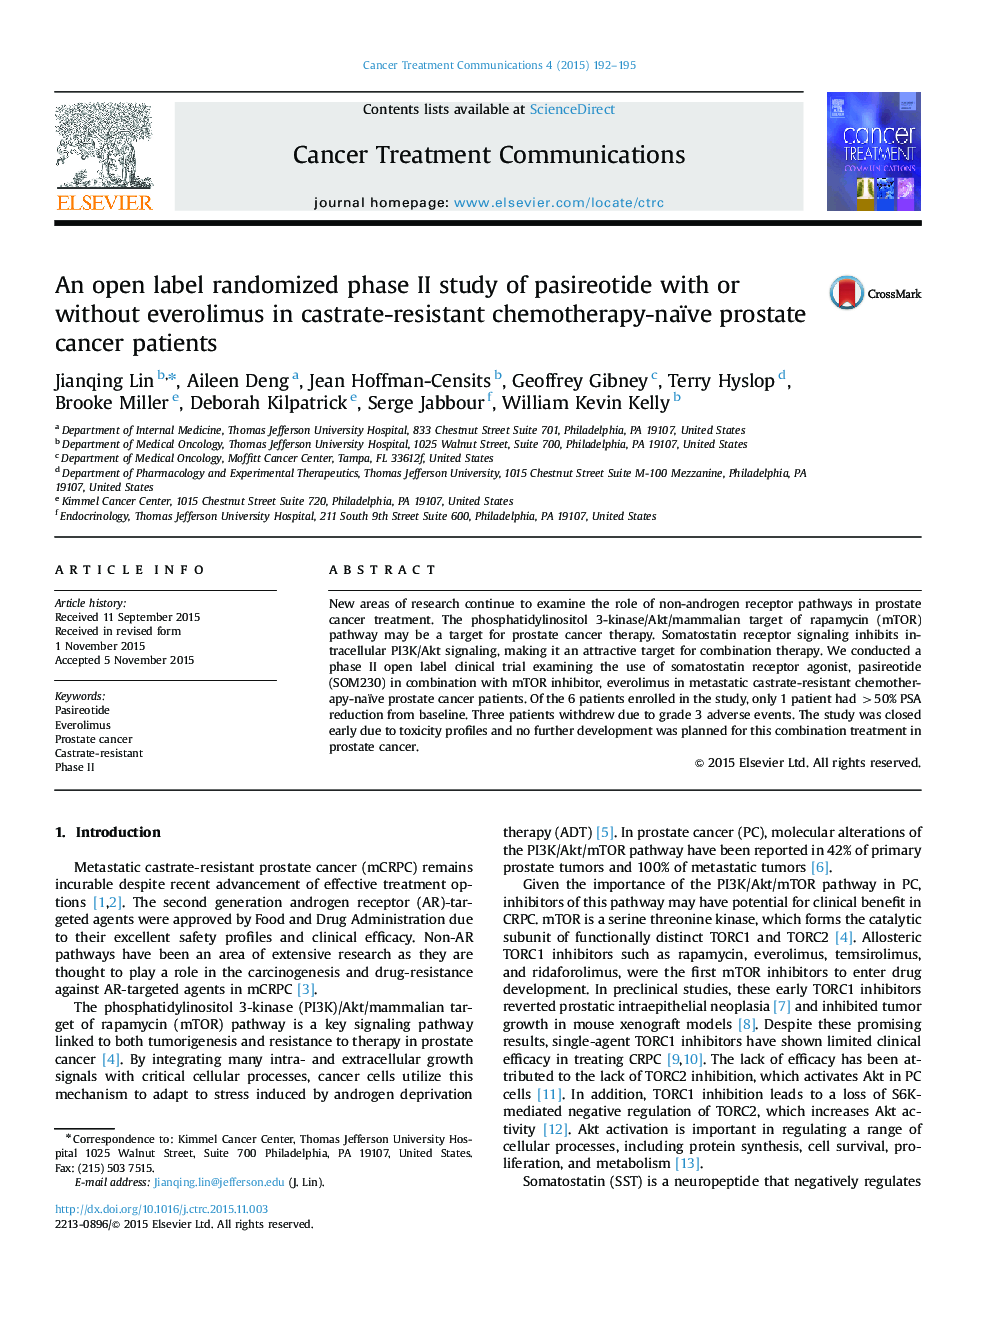 An open label randomized phase II study of pasireotide with or without everolimus in castrate-resistant chemotherapy-naïve prostate cancer patients